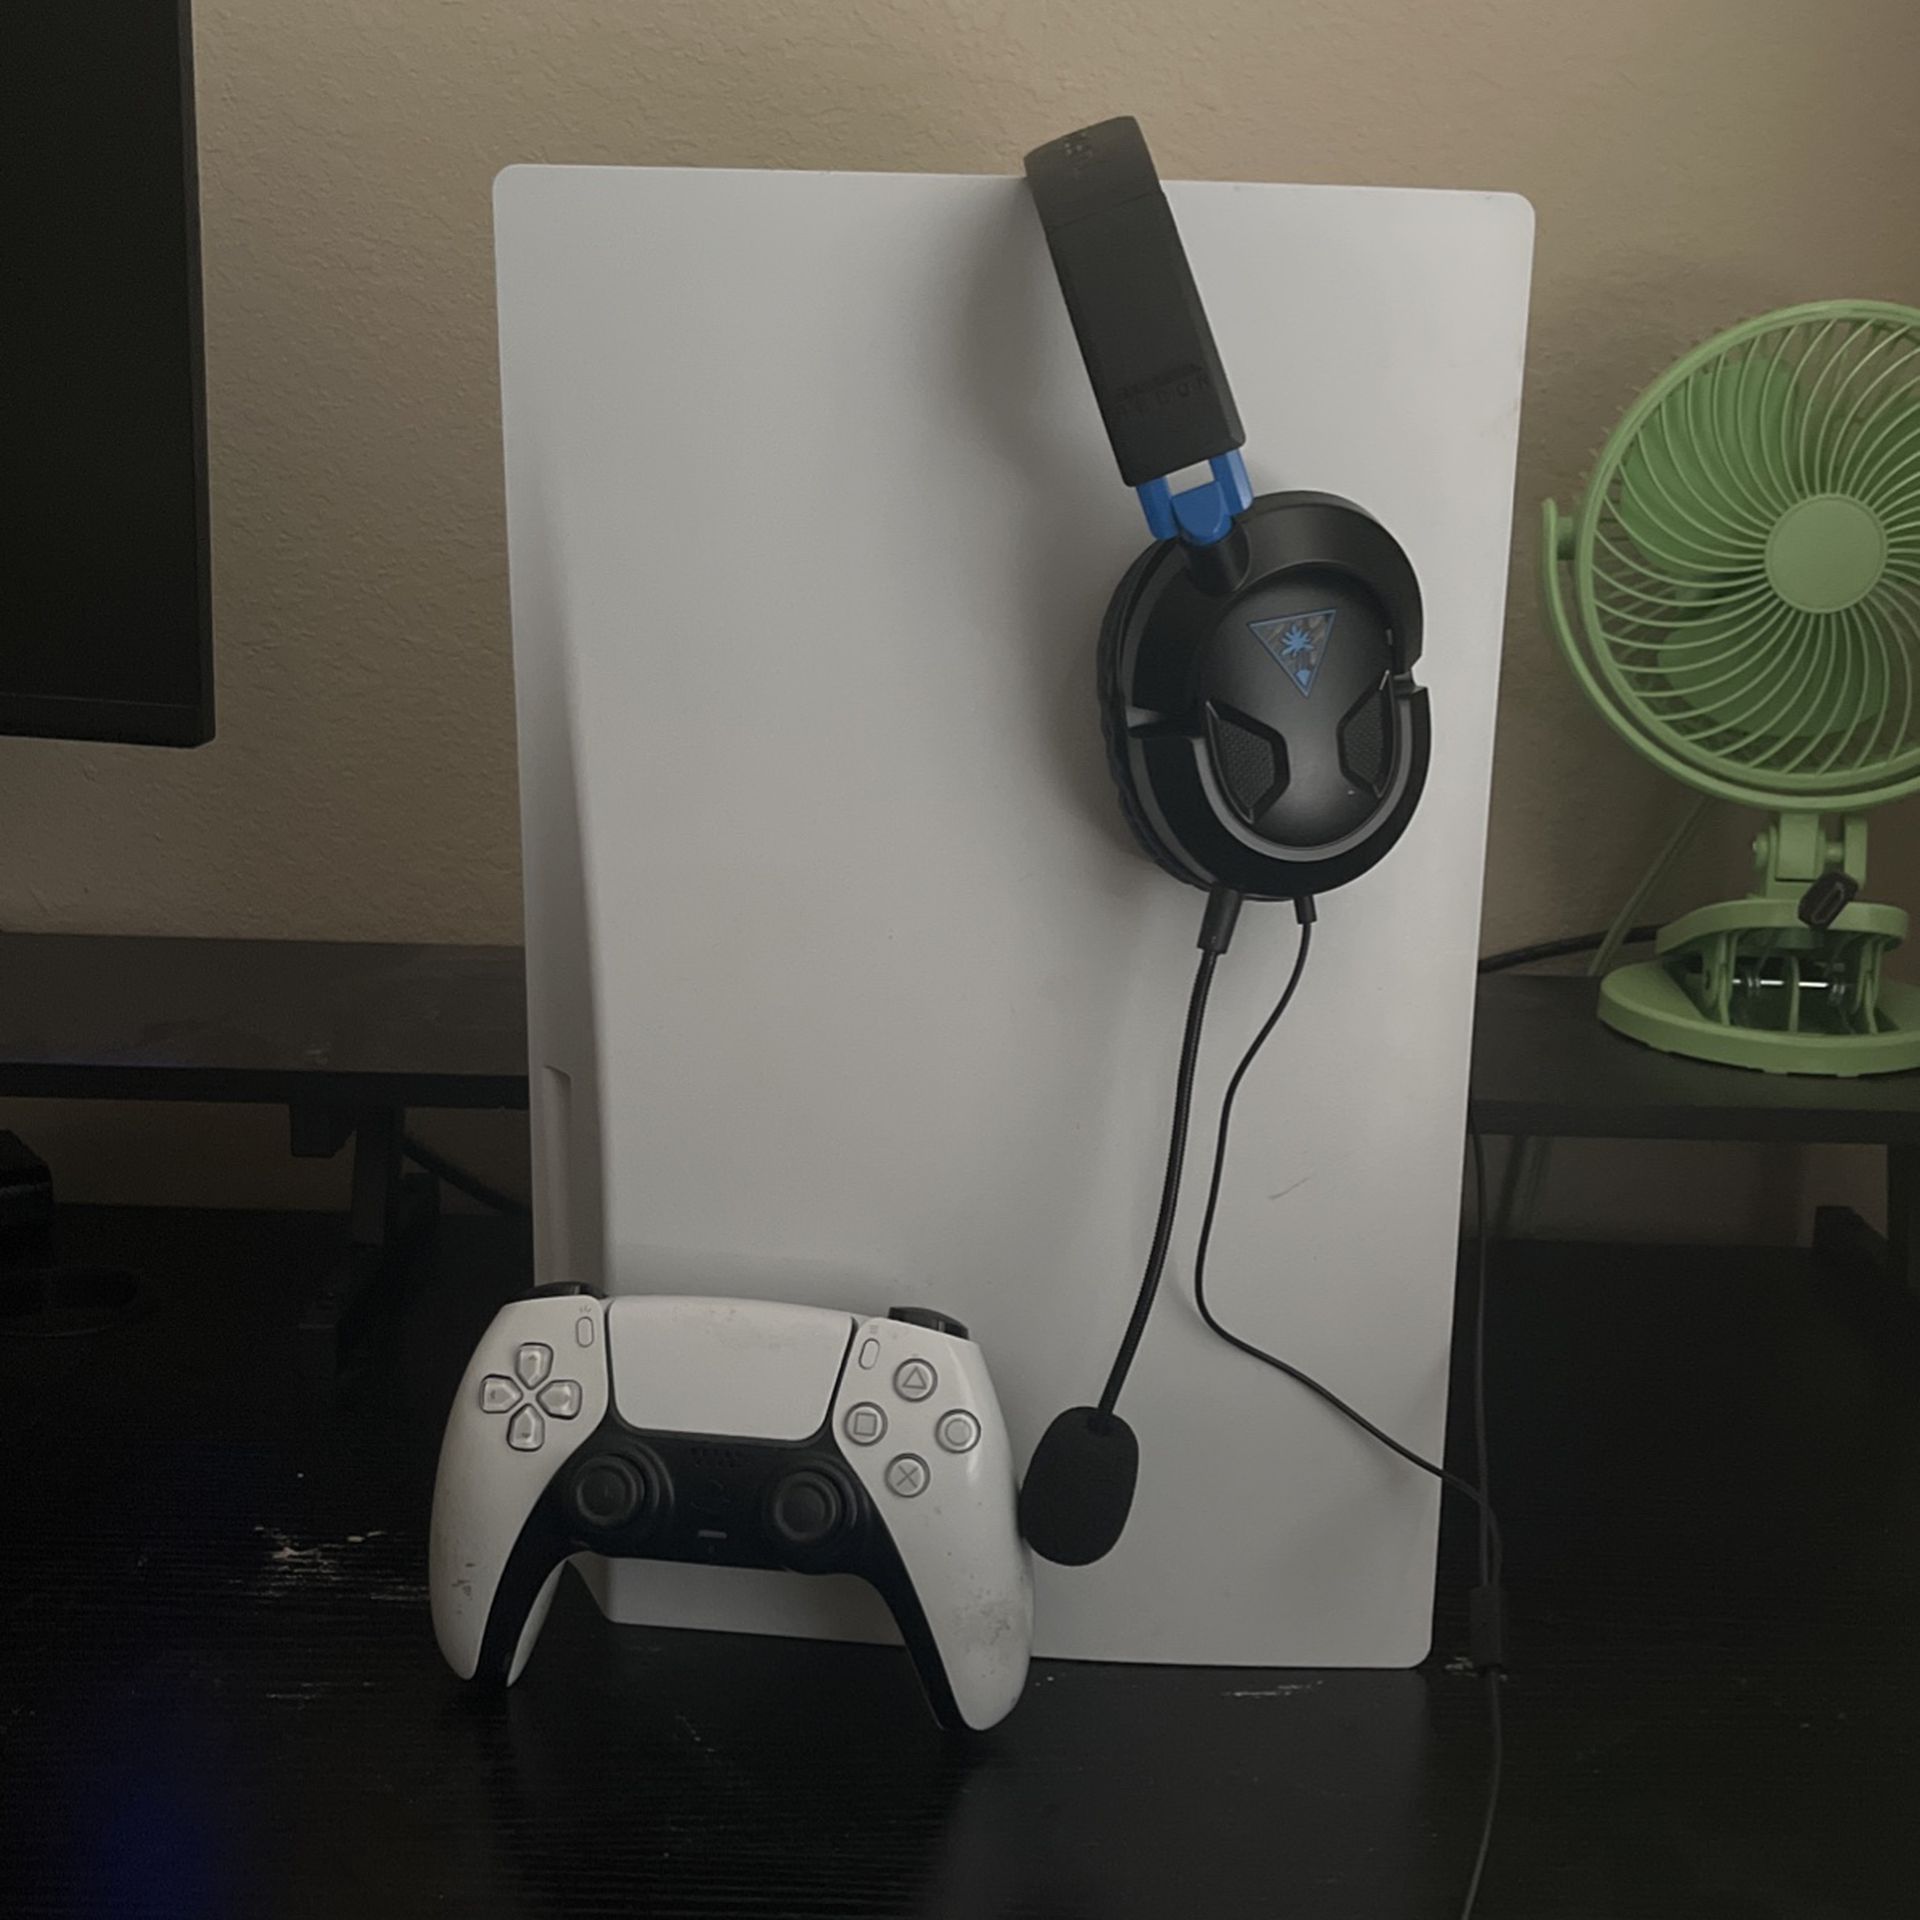 PS5 With Controller And Headset. $300 (price Negotiable)